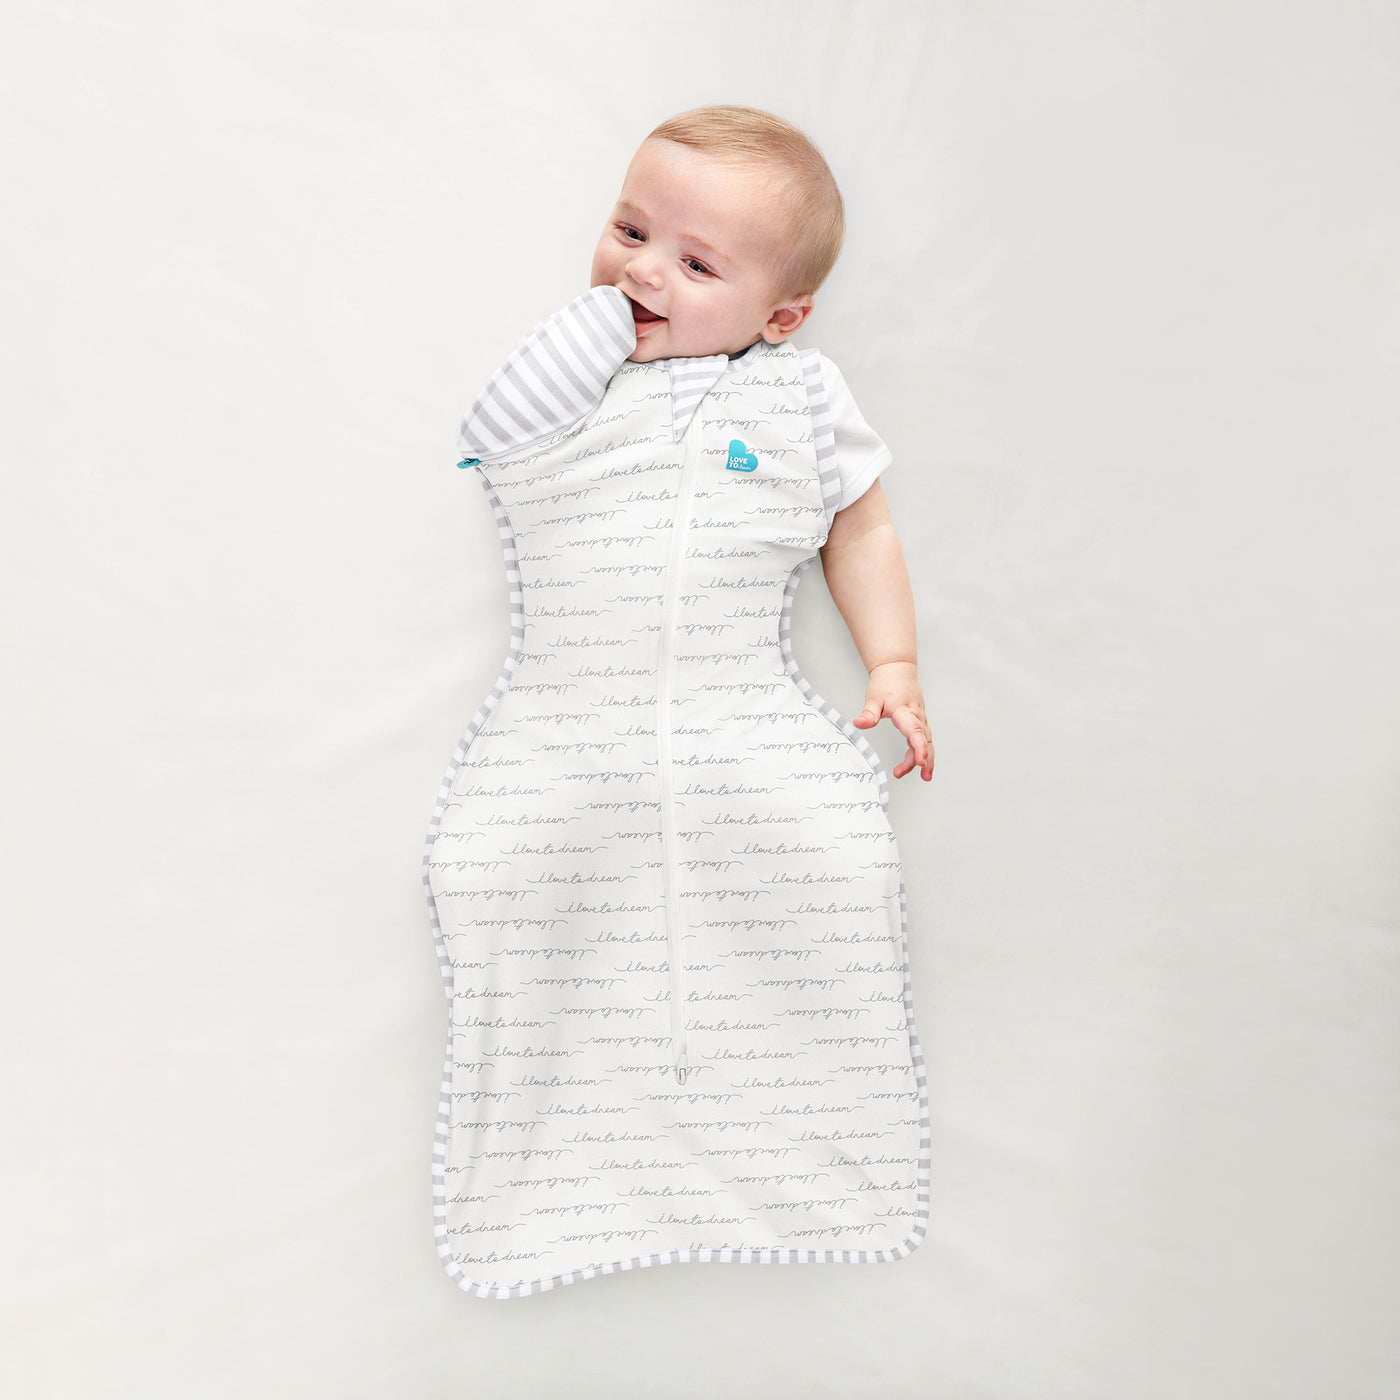 The Swaddle Up™ Transition Bag helps your baby to gradually adjust to sleeping unswaddled. Simply unzip one wing – either as baby sleeps or when dressing them – for a few sleep cycles to help your baby get used to the sensation of sleeping with one arm free. Complete the transition by simply removing the second wing!